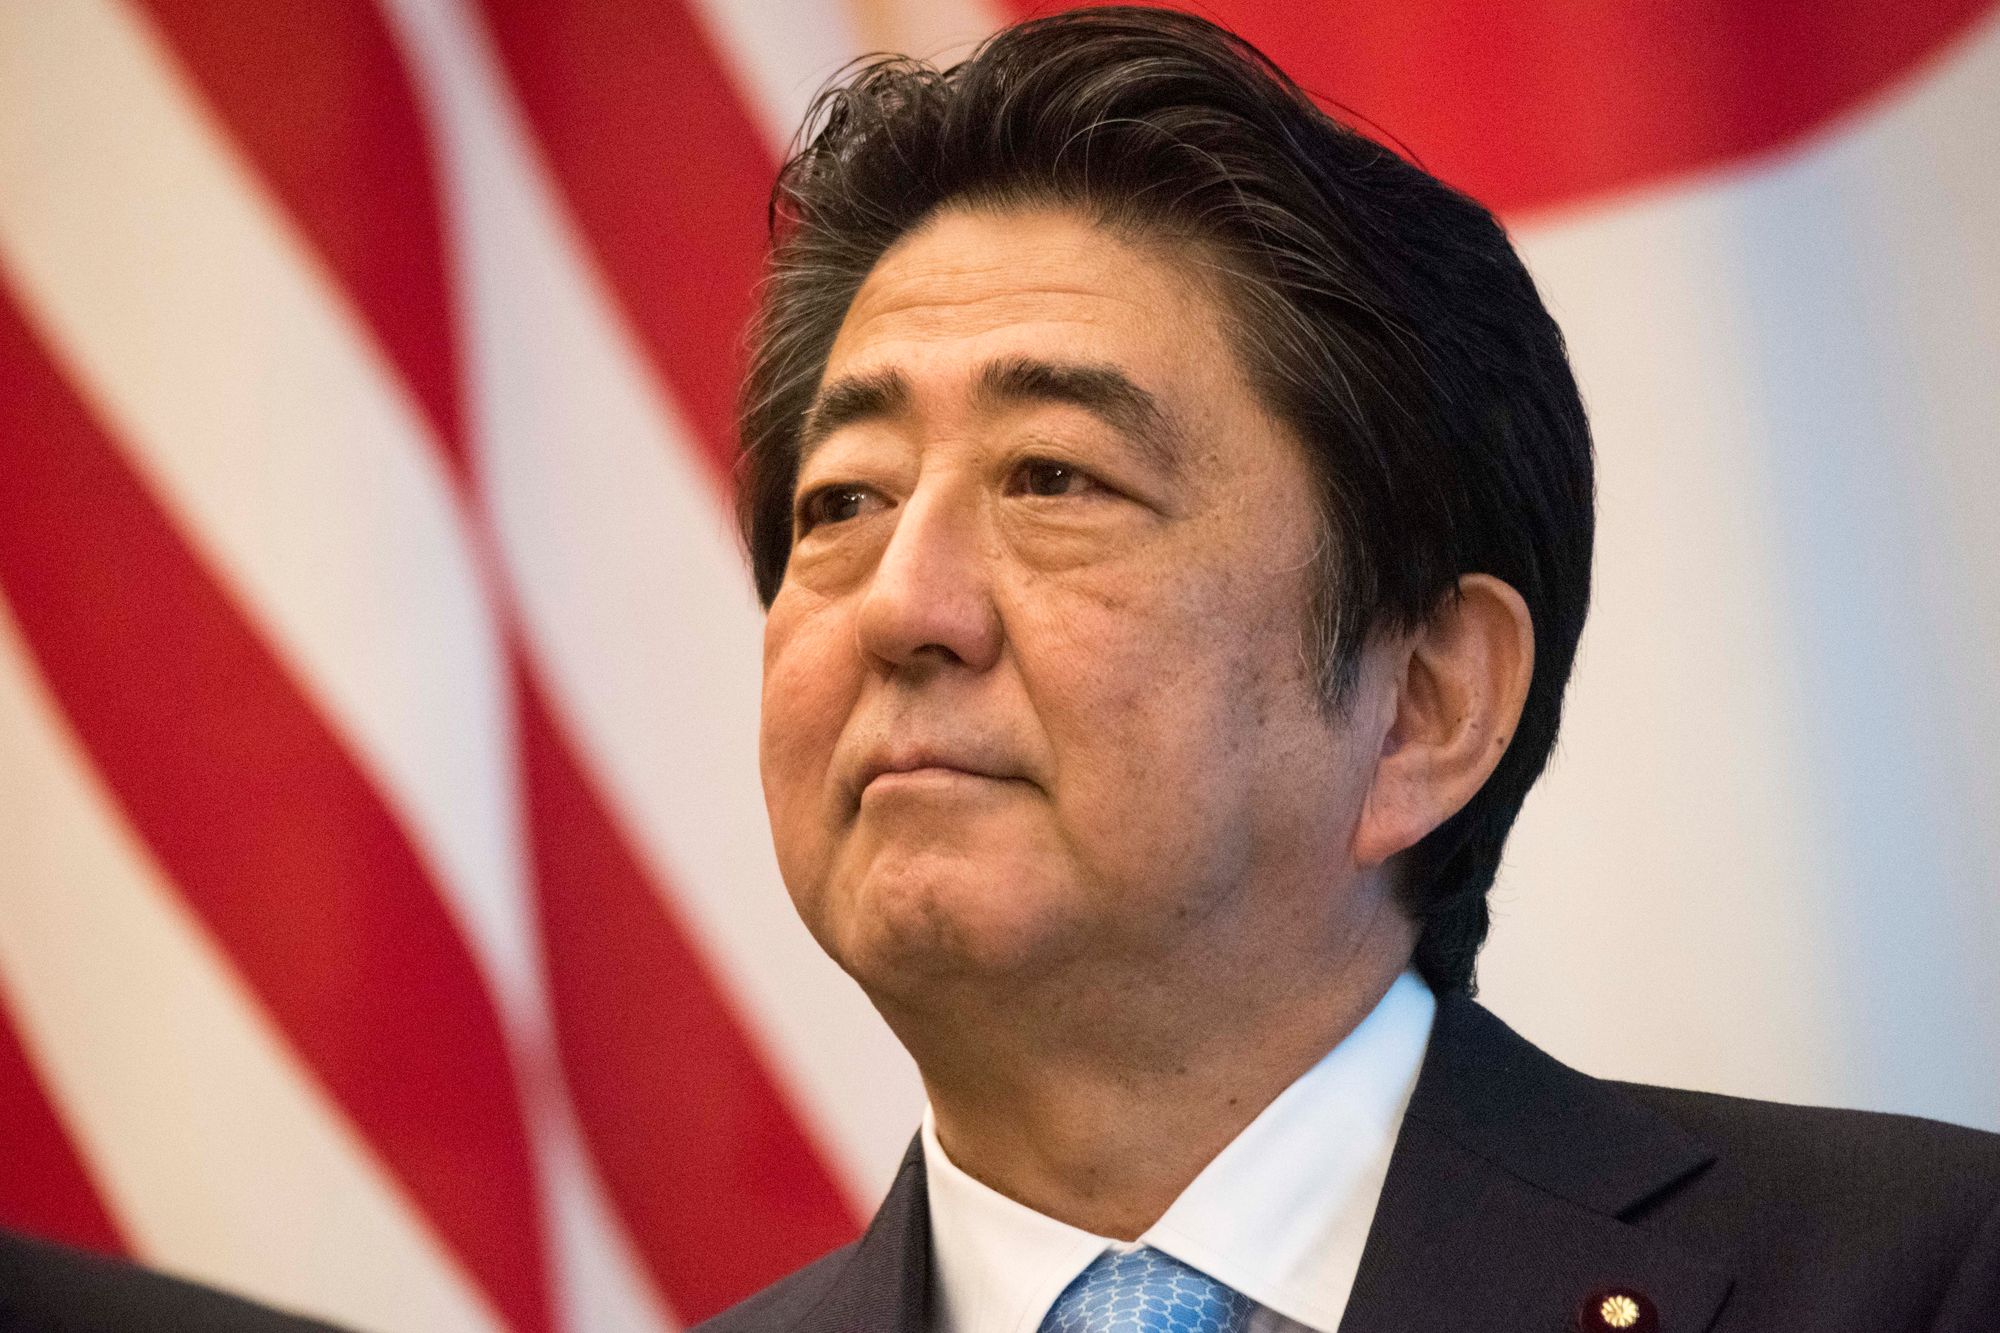 Japan's former Prime Minister Shinzo Abe. (DOD photo by U.S. Navy Petty Officer 1st Class Dominique A. Pineiro)